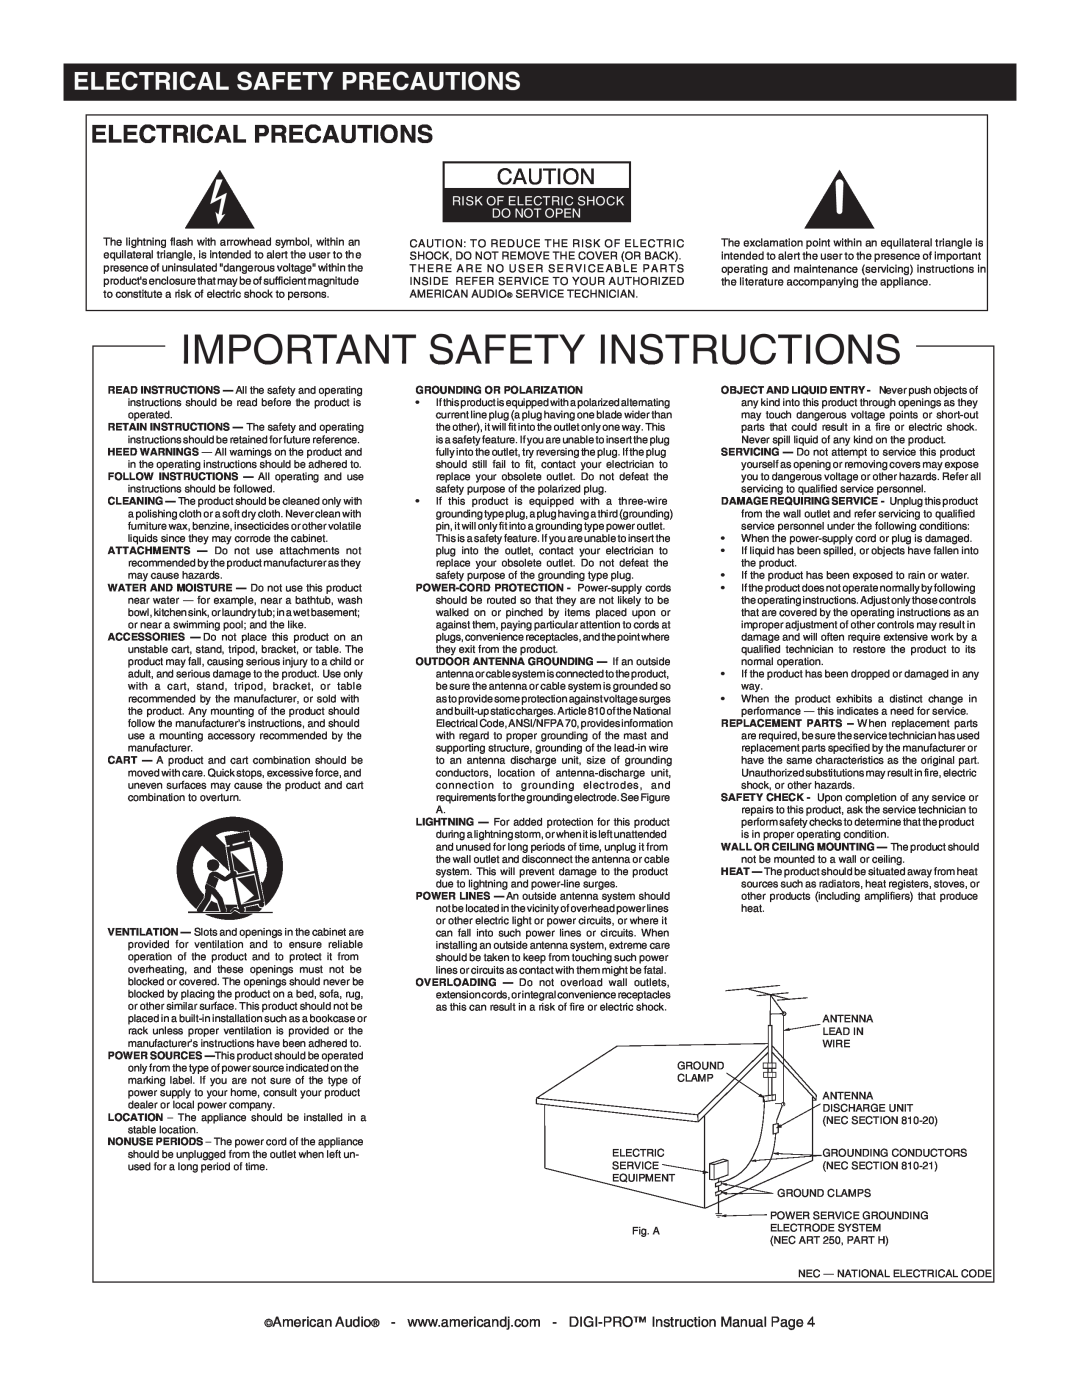 American Audio DIGI-PRO Electrical Precautions, Important Safety Instructions, Electrical Safety Precautions 